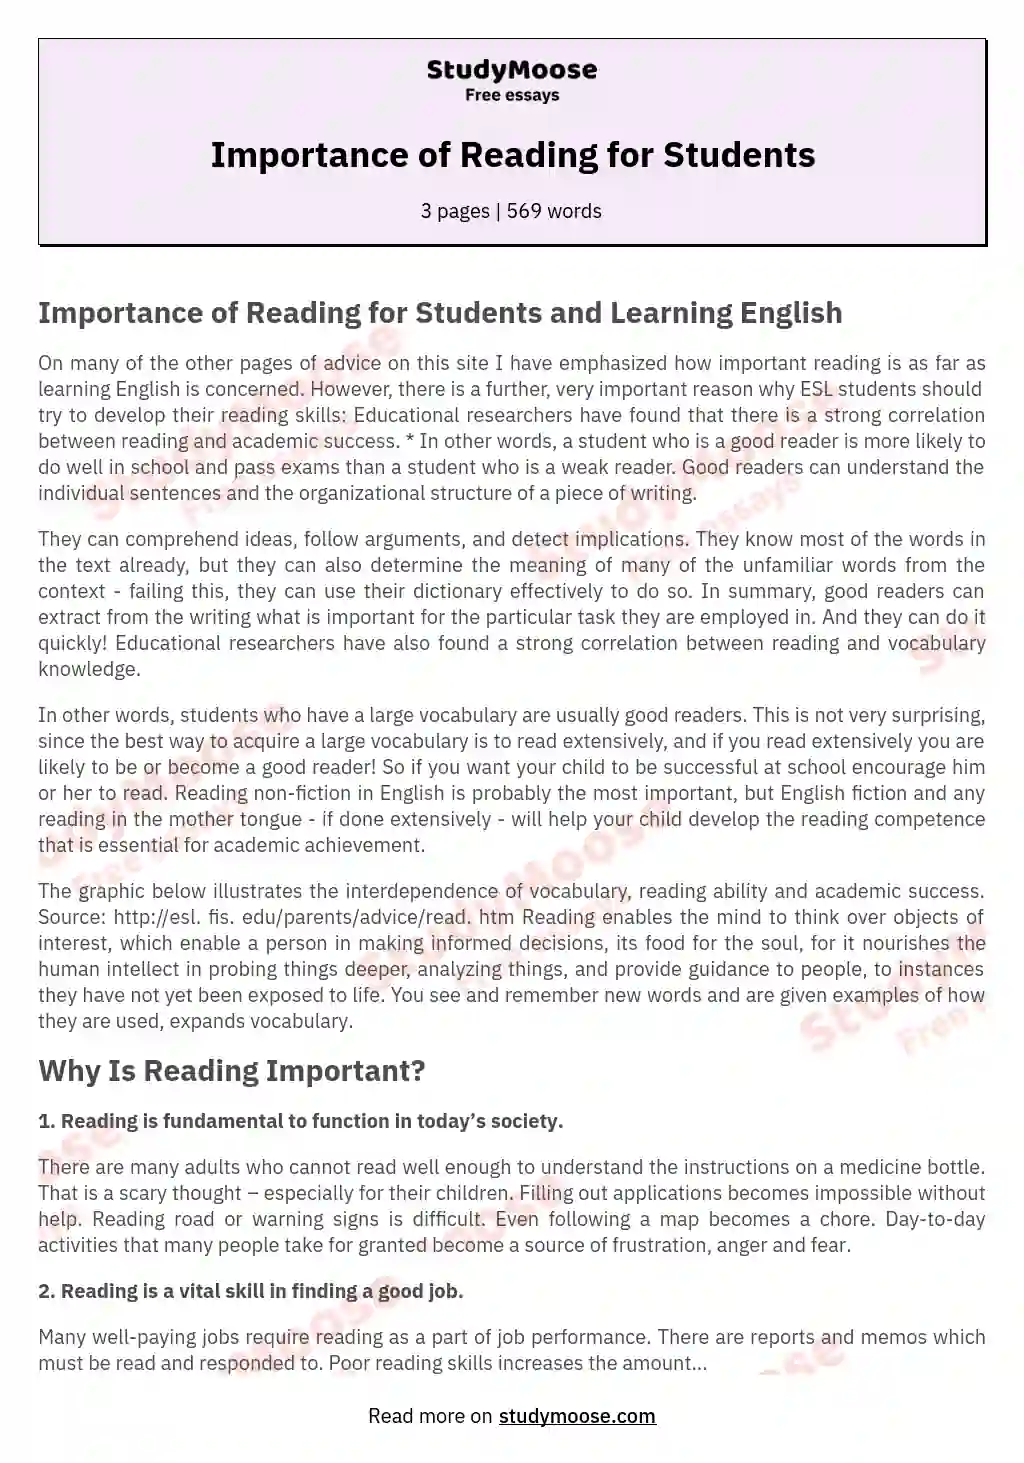 Importance of Reading for Students essay